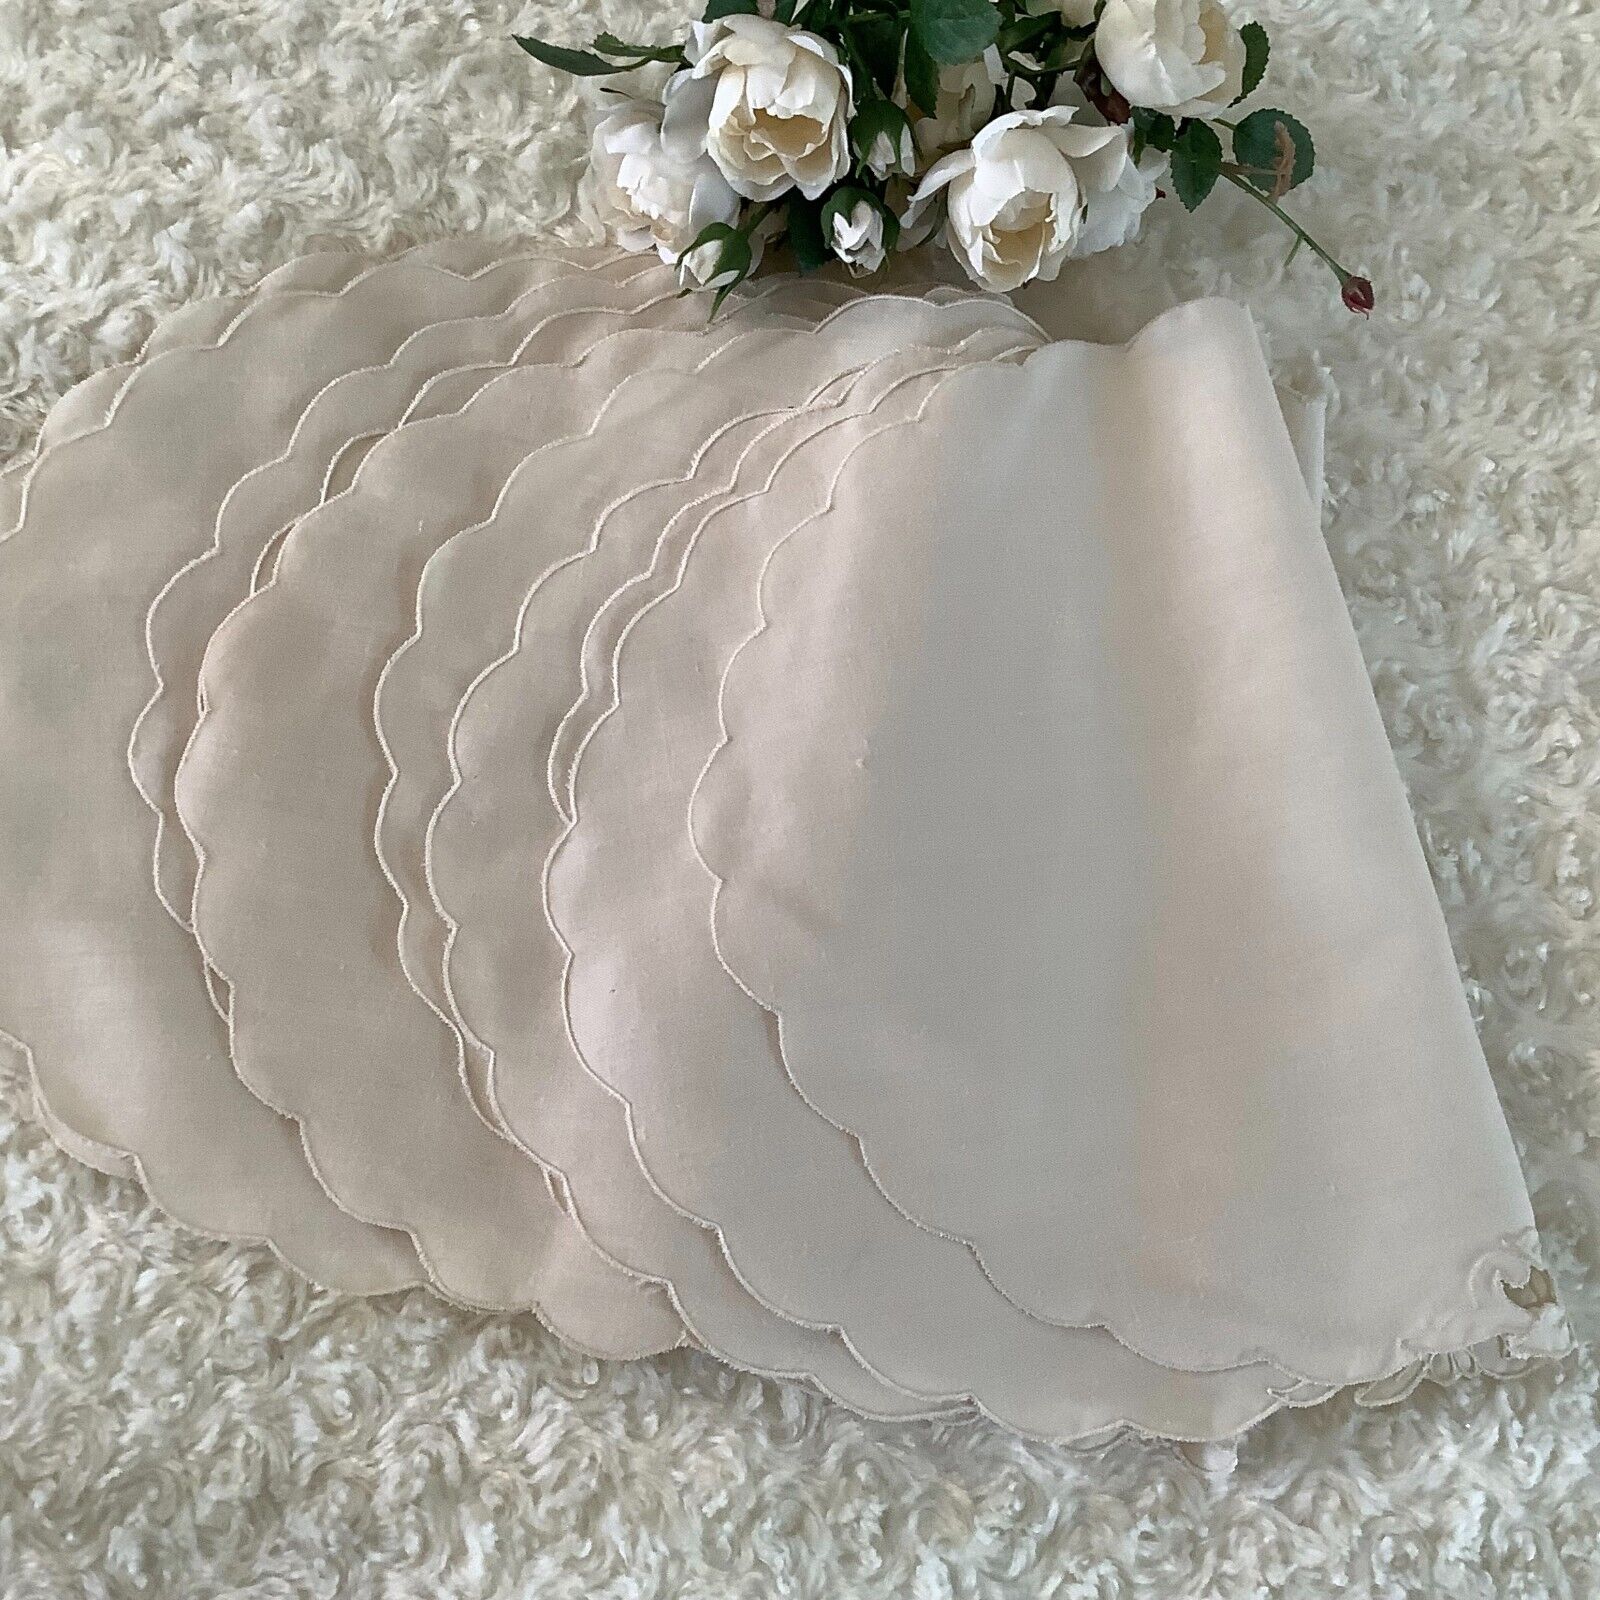 6 Vintage Ivory thin sheer scalloped edge cut out floral placemats 13